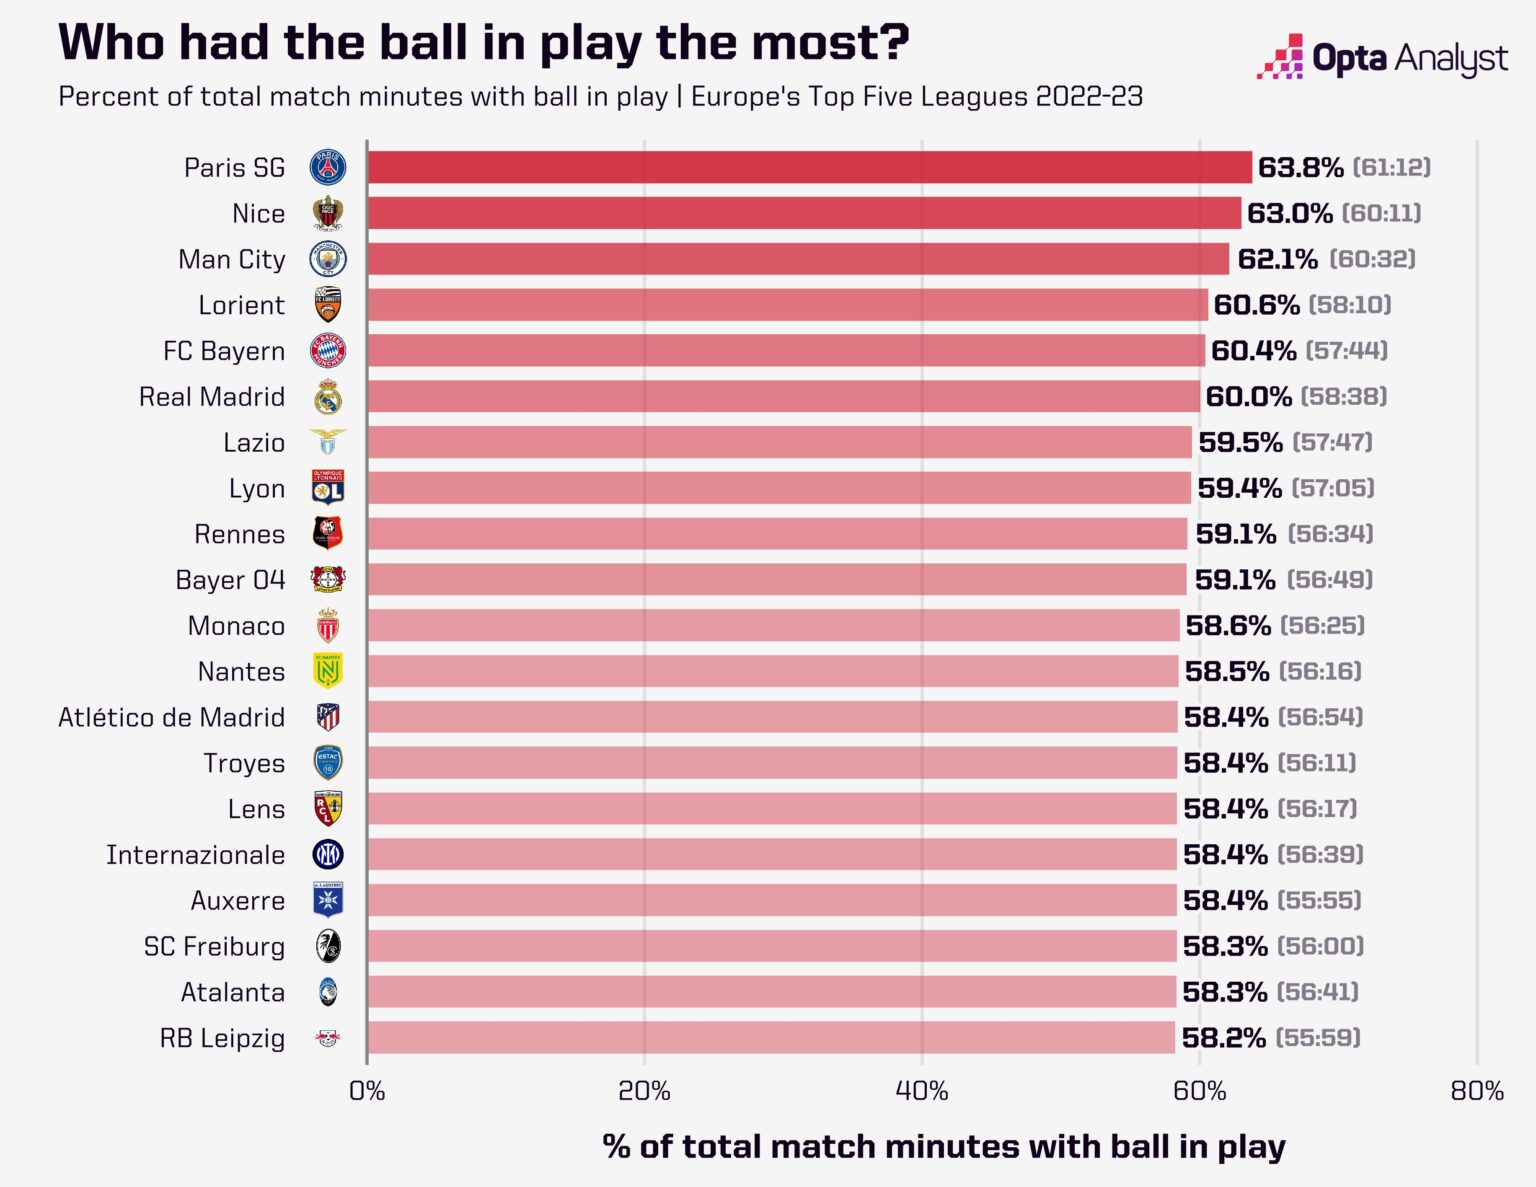 top-5-leagues-most-ball-in-play-1536x118